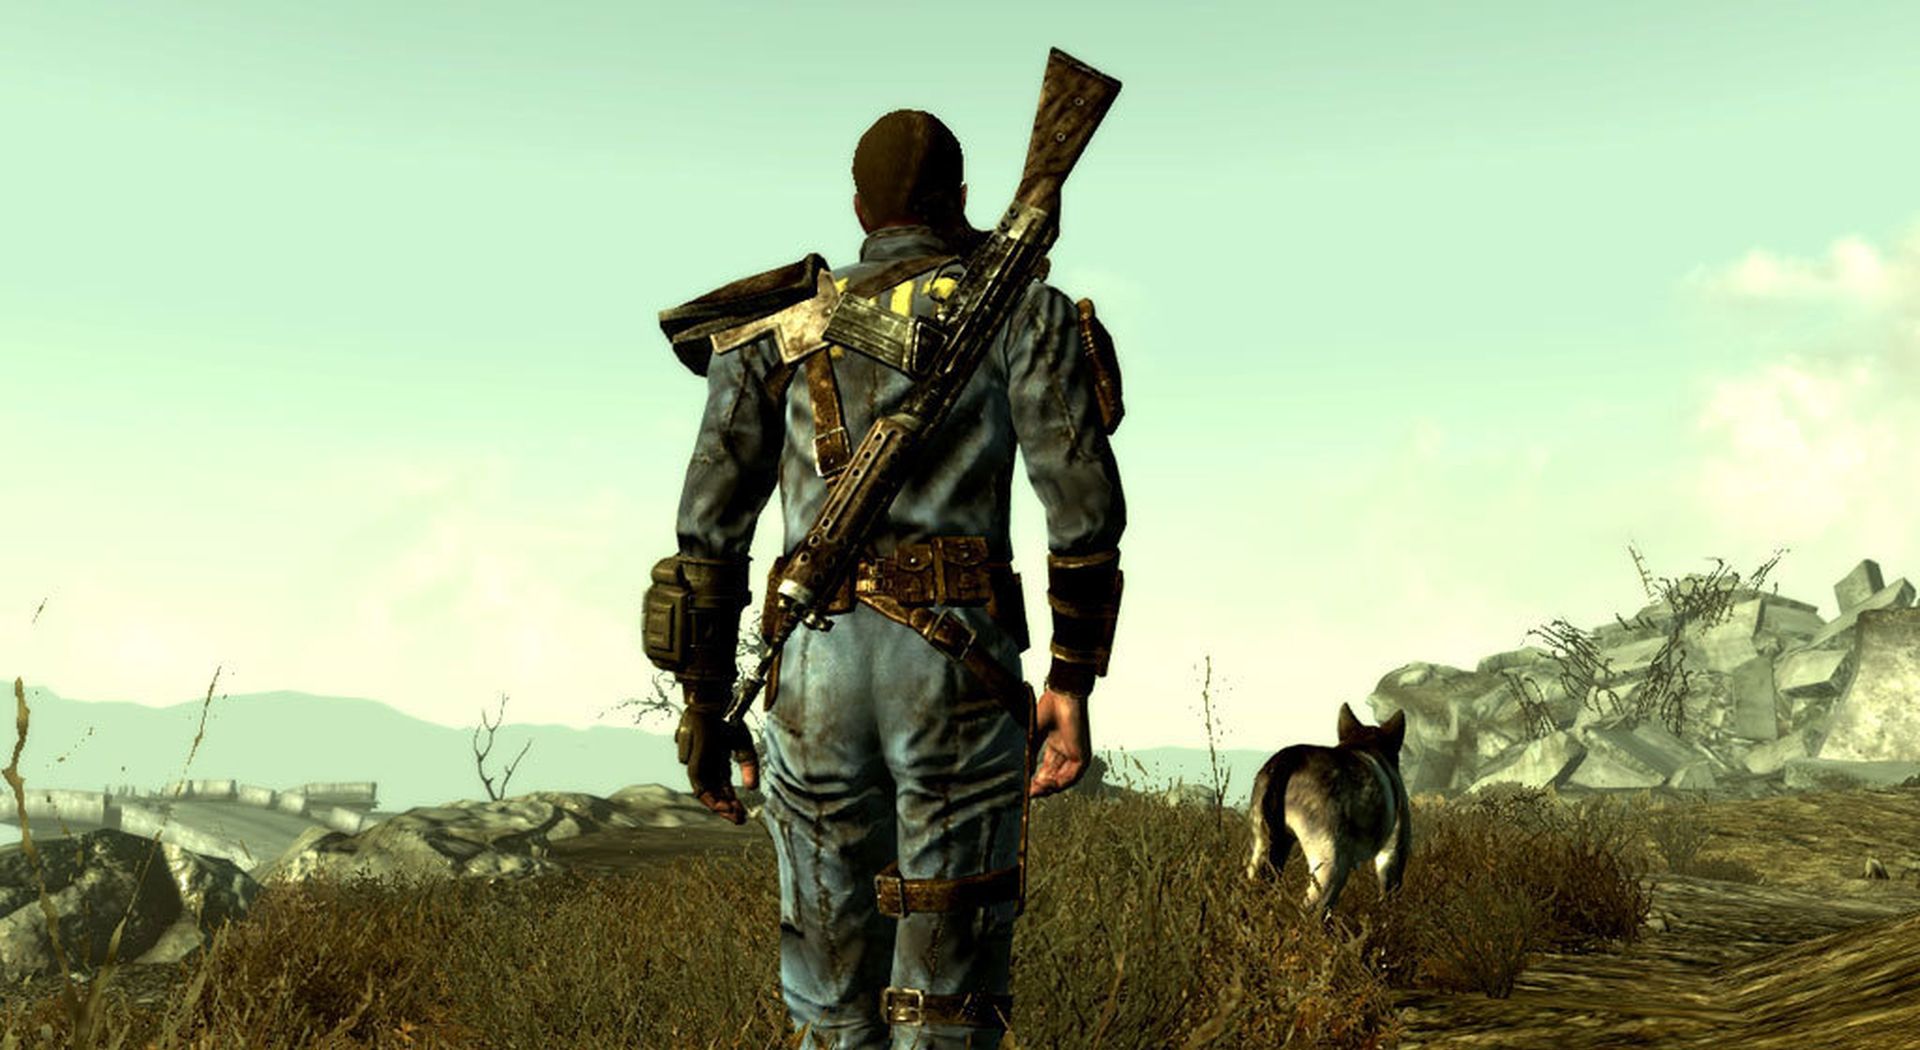 In this article, we are going to be covering how to fix Fallout 3 not launching, which makes Fallout 3 crashes on startup, so you can keep playing this classic game on your PC.